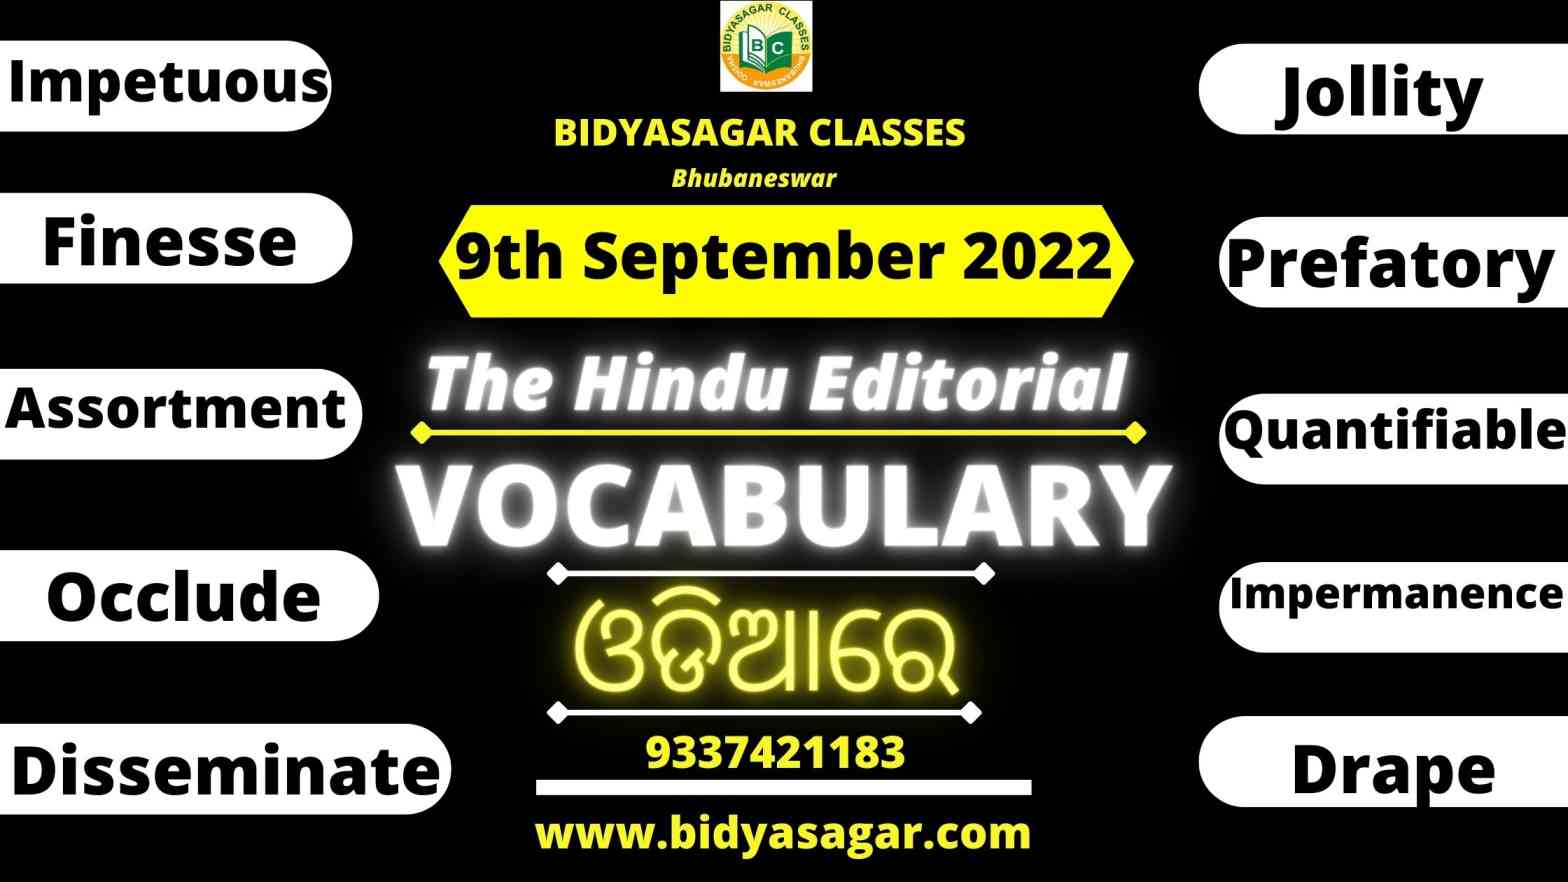 The Hindu Editorial Vocabulary of 9th September 2022